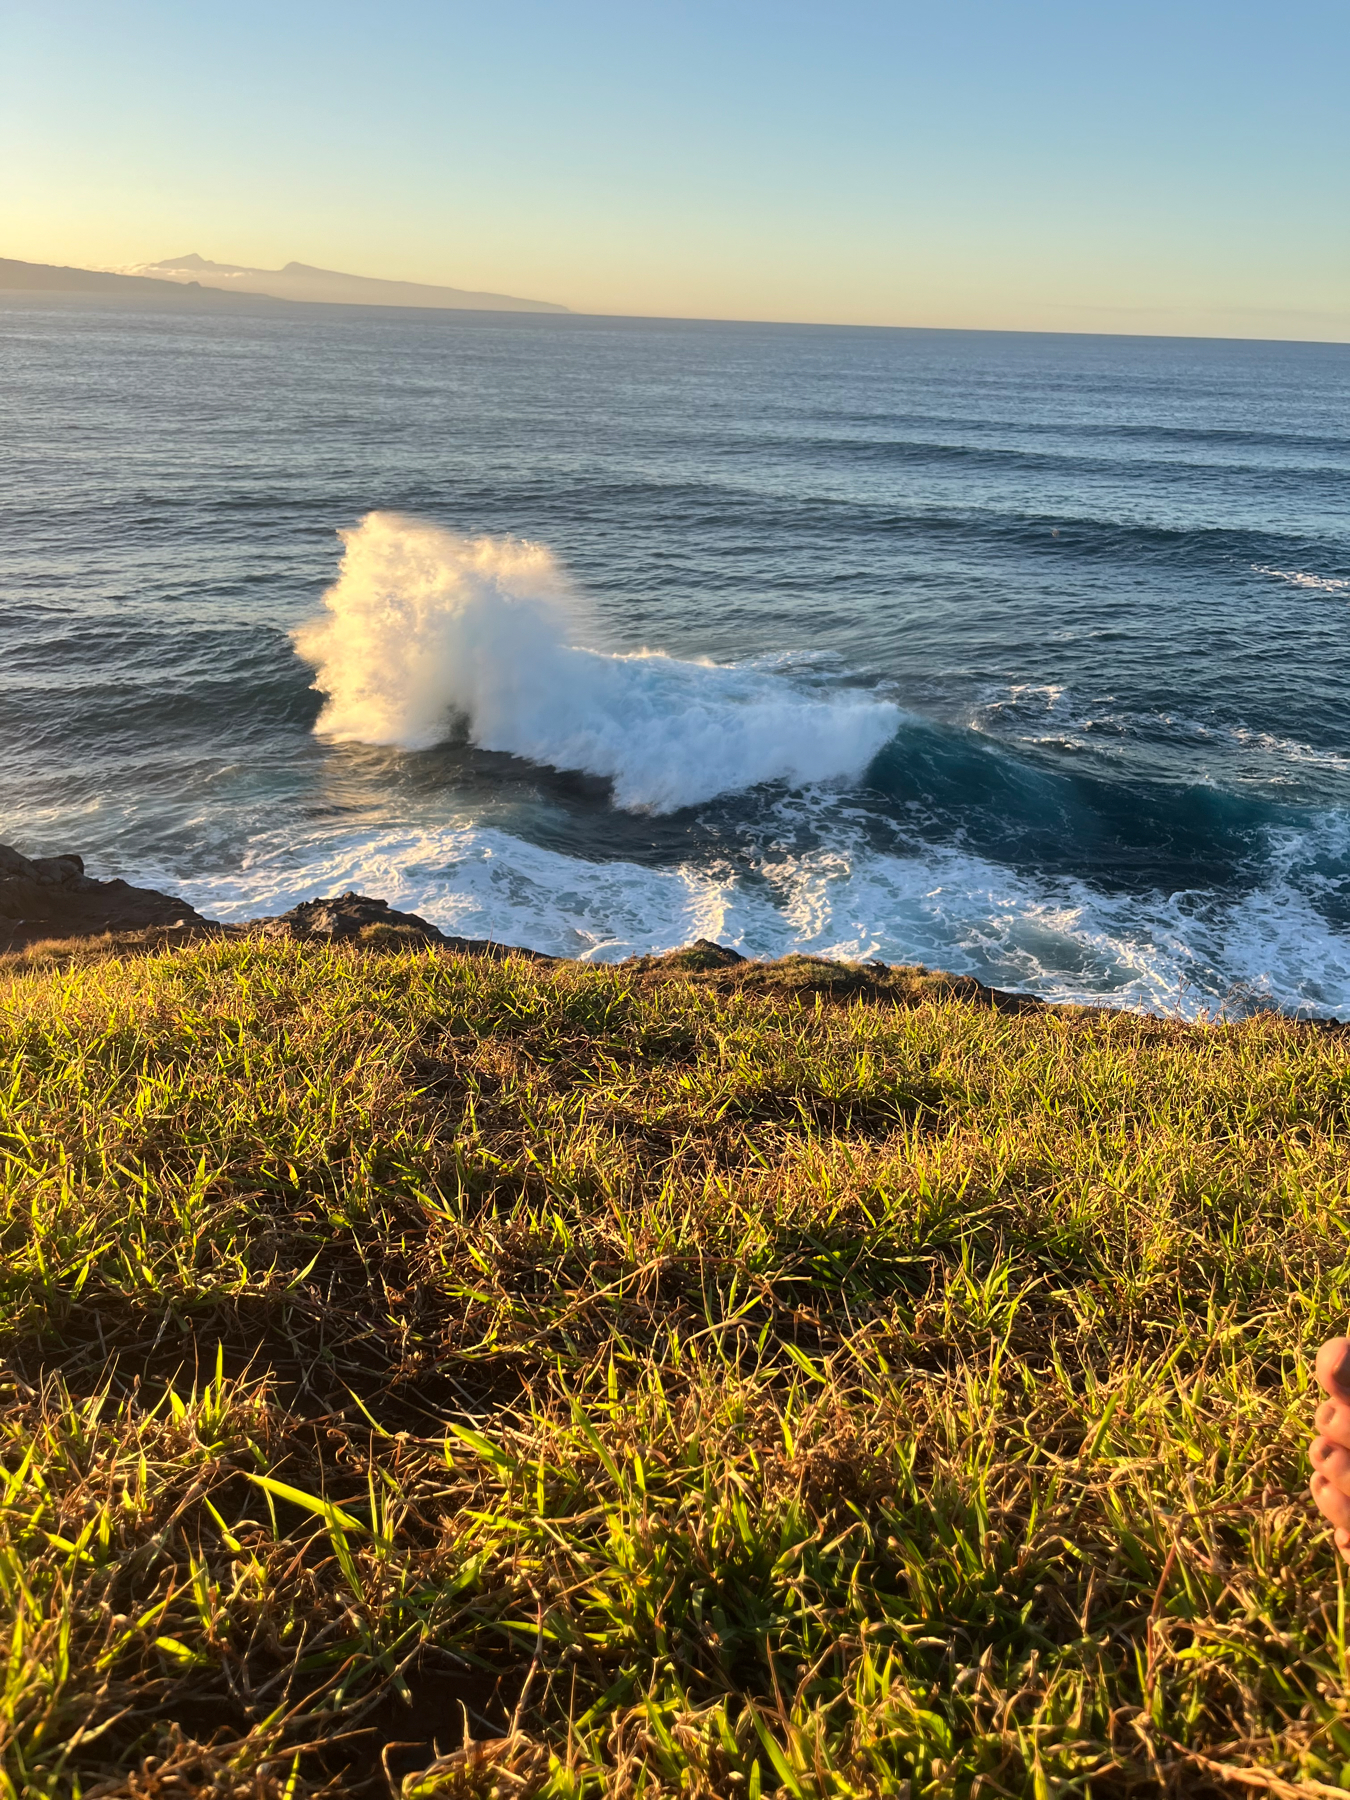 Ocean waves crashing against rocky coastline with grassy foreground and the Hawaiian island of Molokai in the distance at sunset.